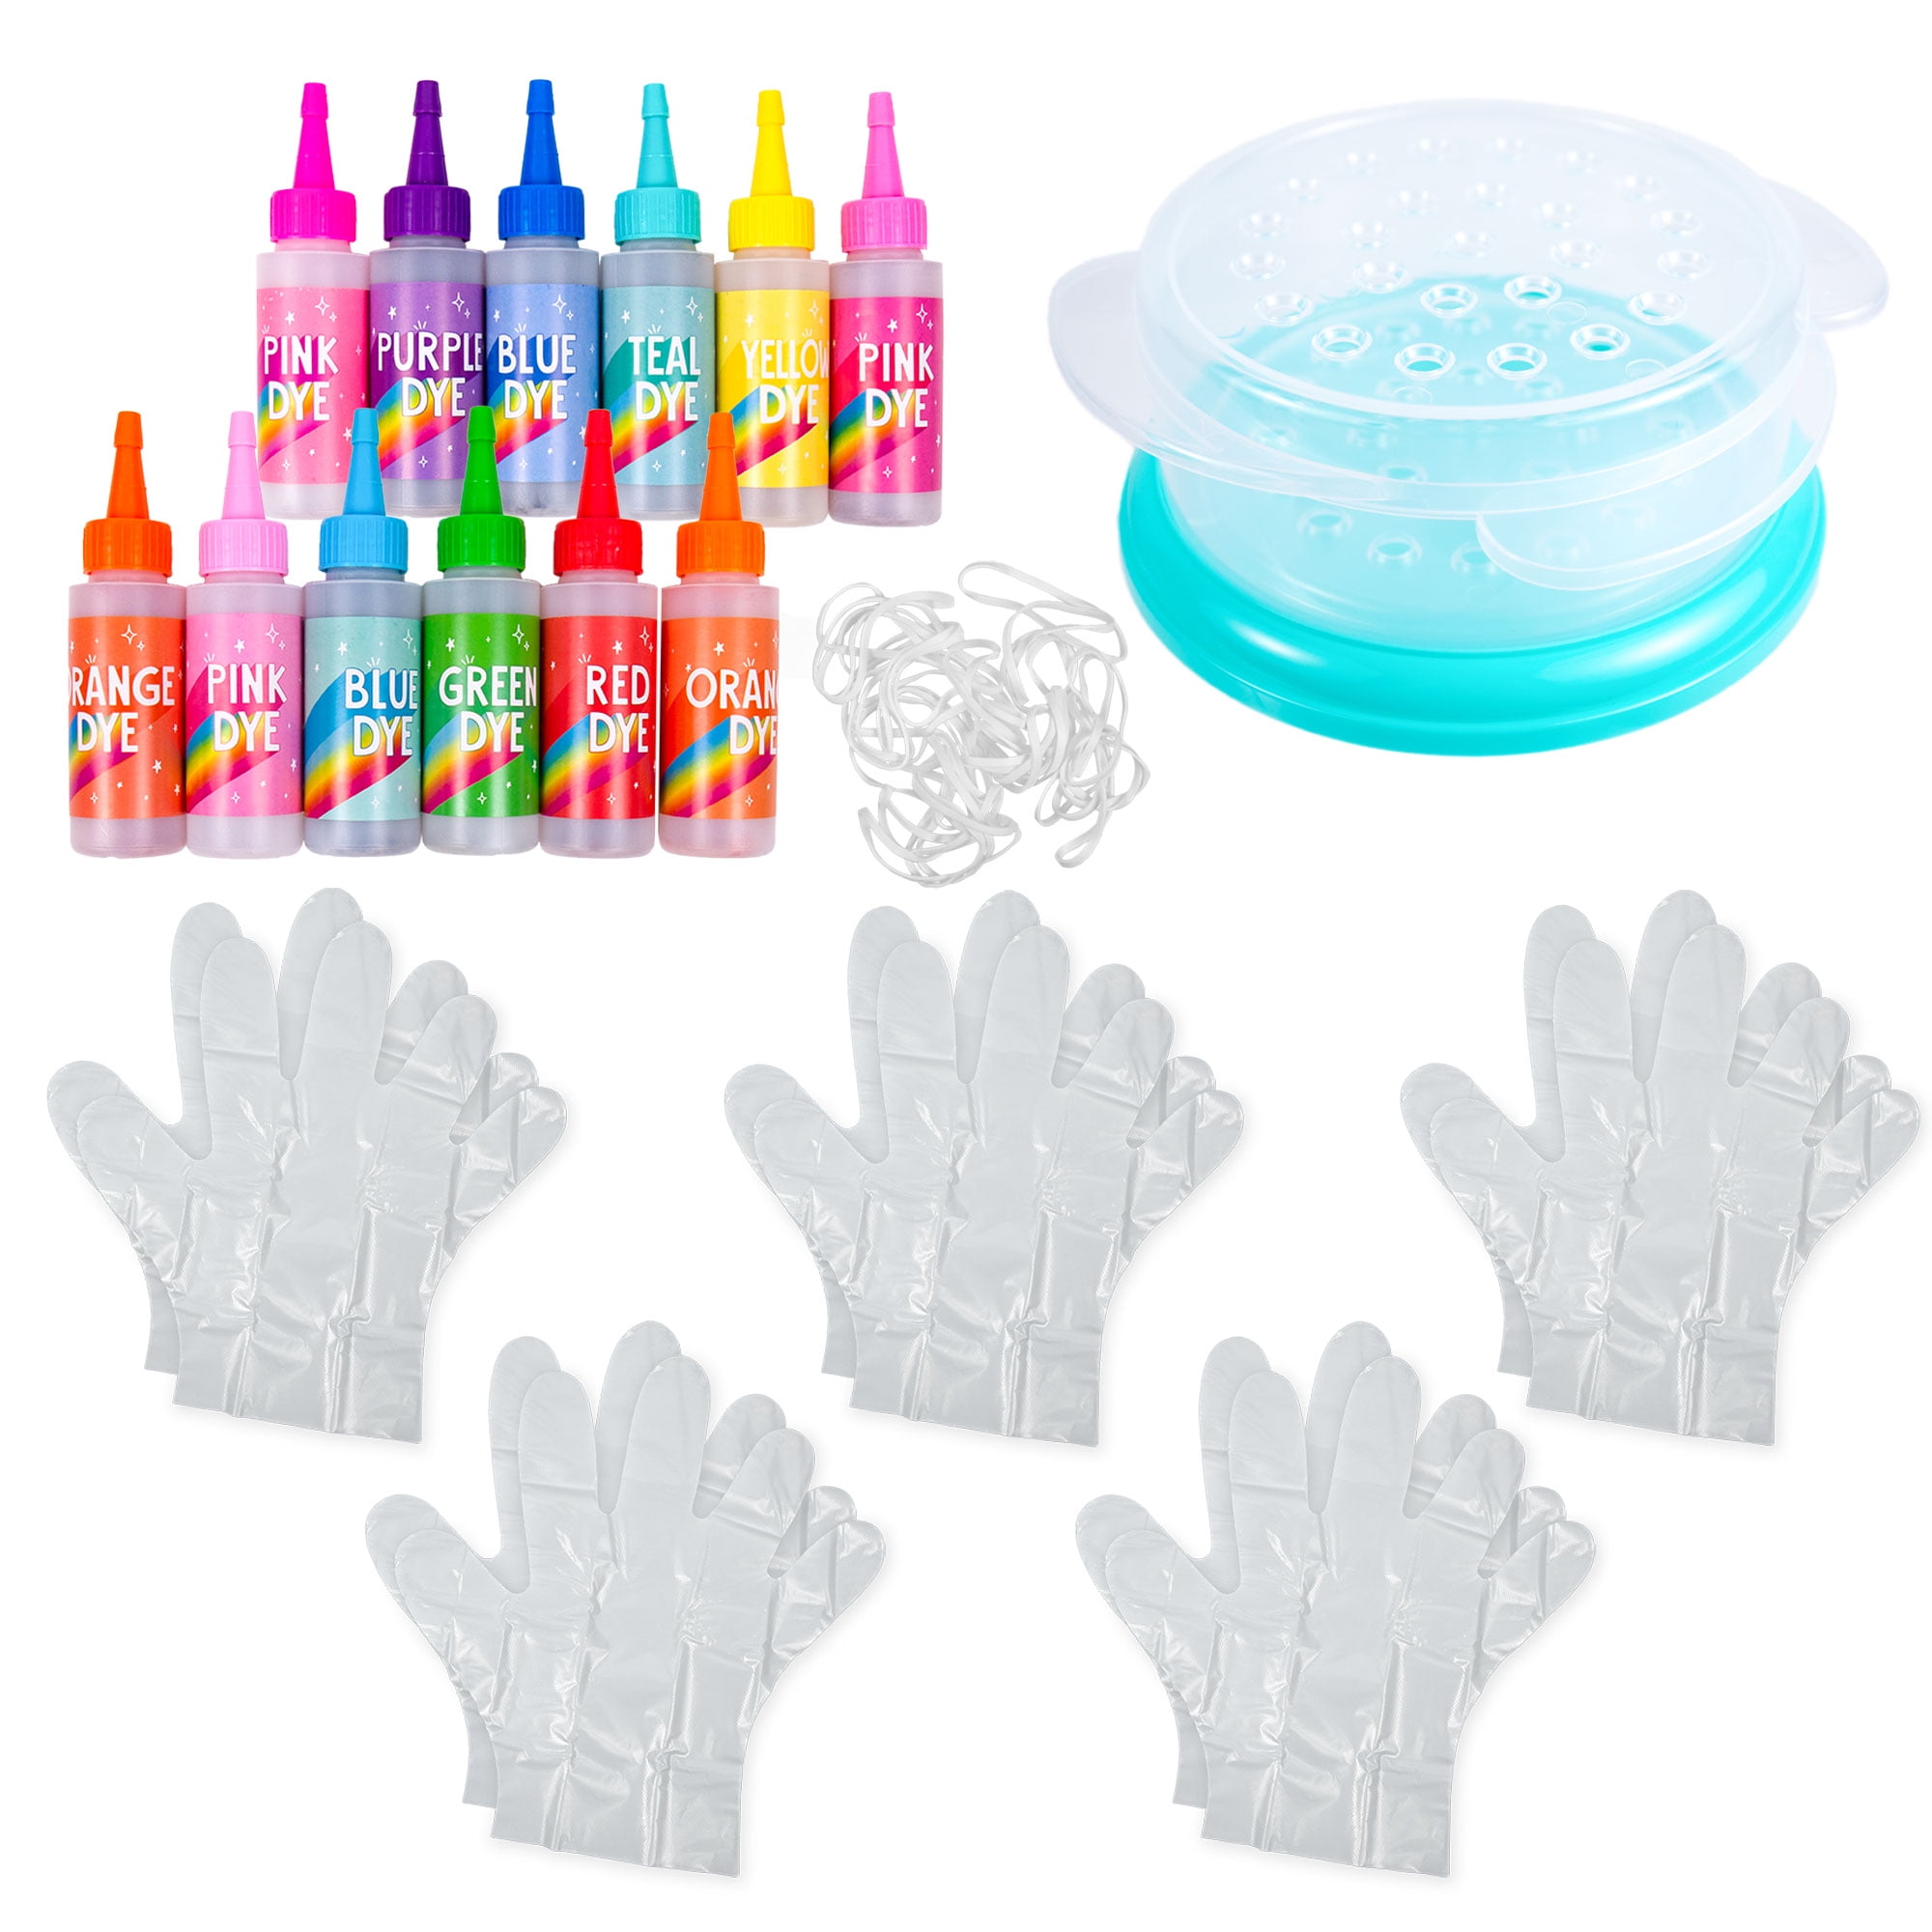 Tie-Dye Kit Create Your Own style Design Educational Craft Activity Experiment 